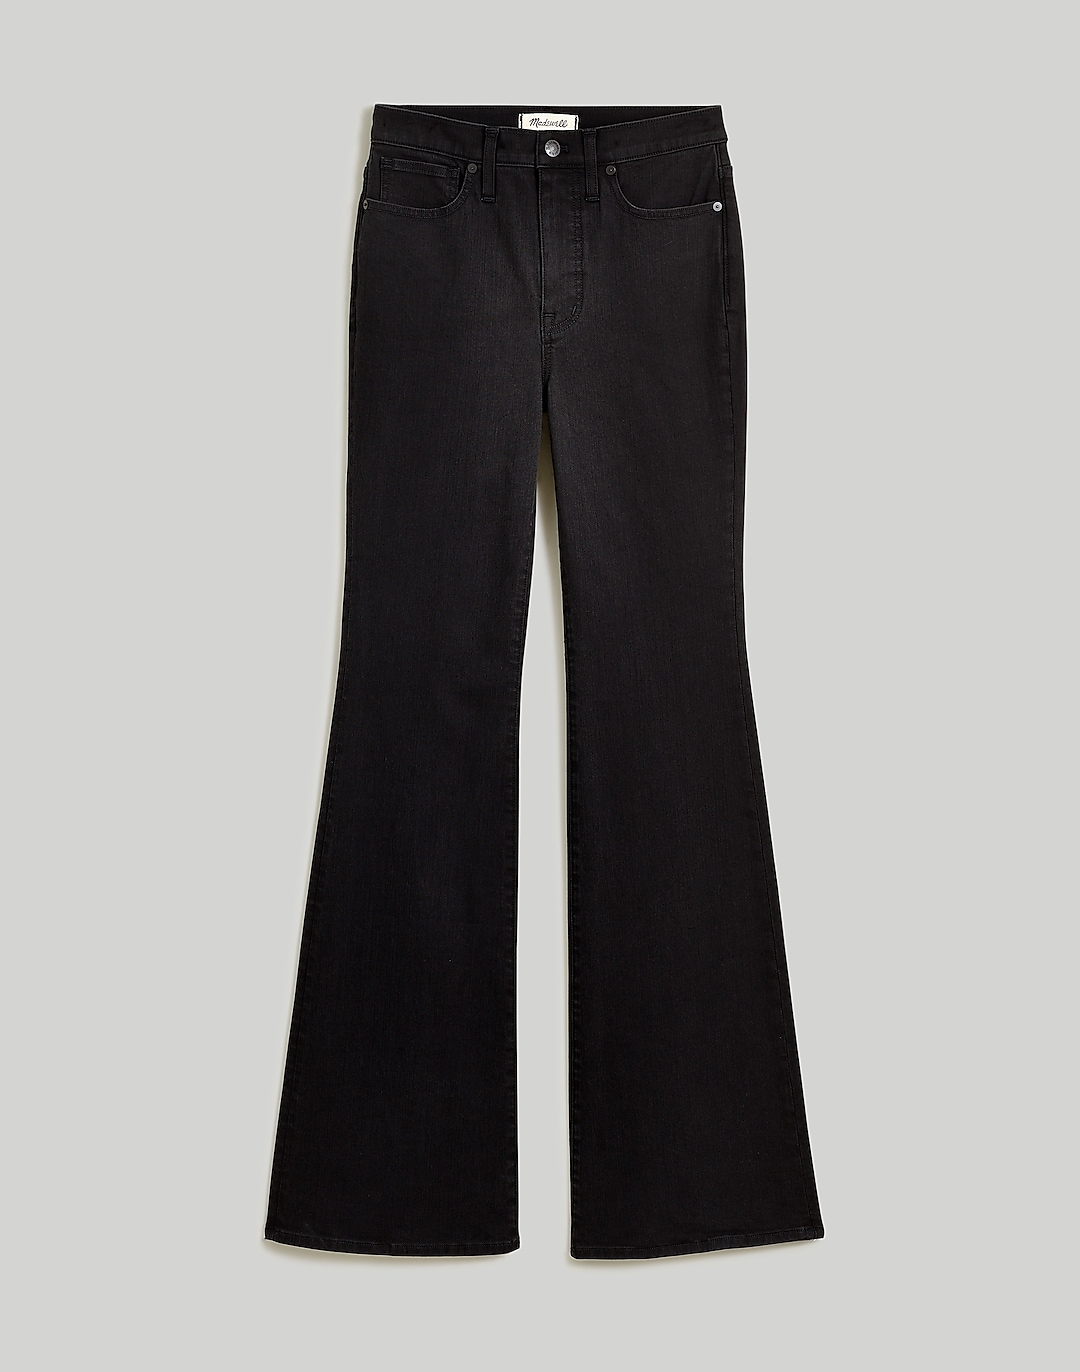 Petite Skinny Flare Jeans in Black Frost Wash | Madewell